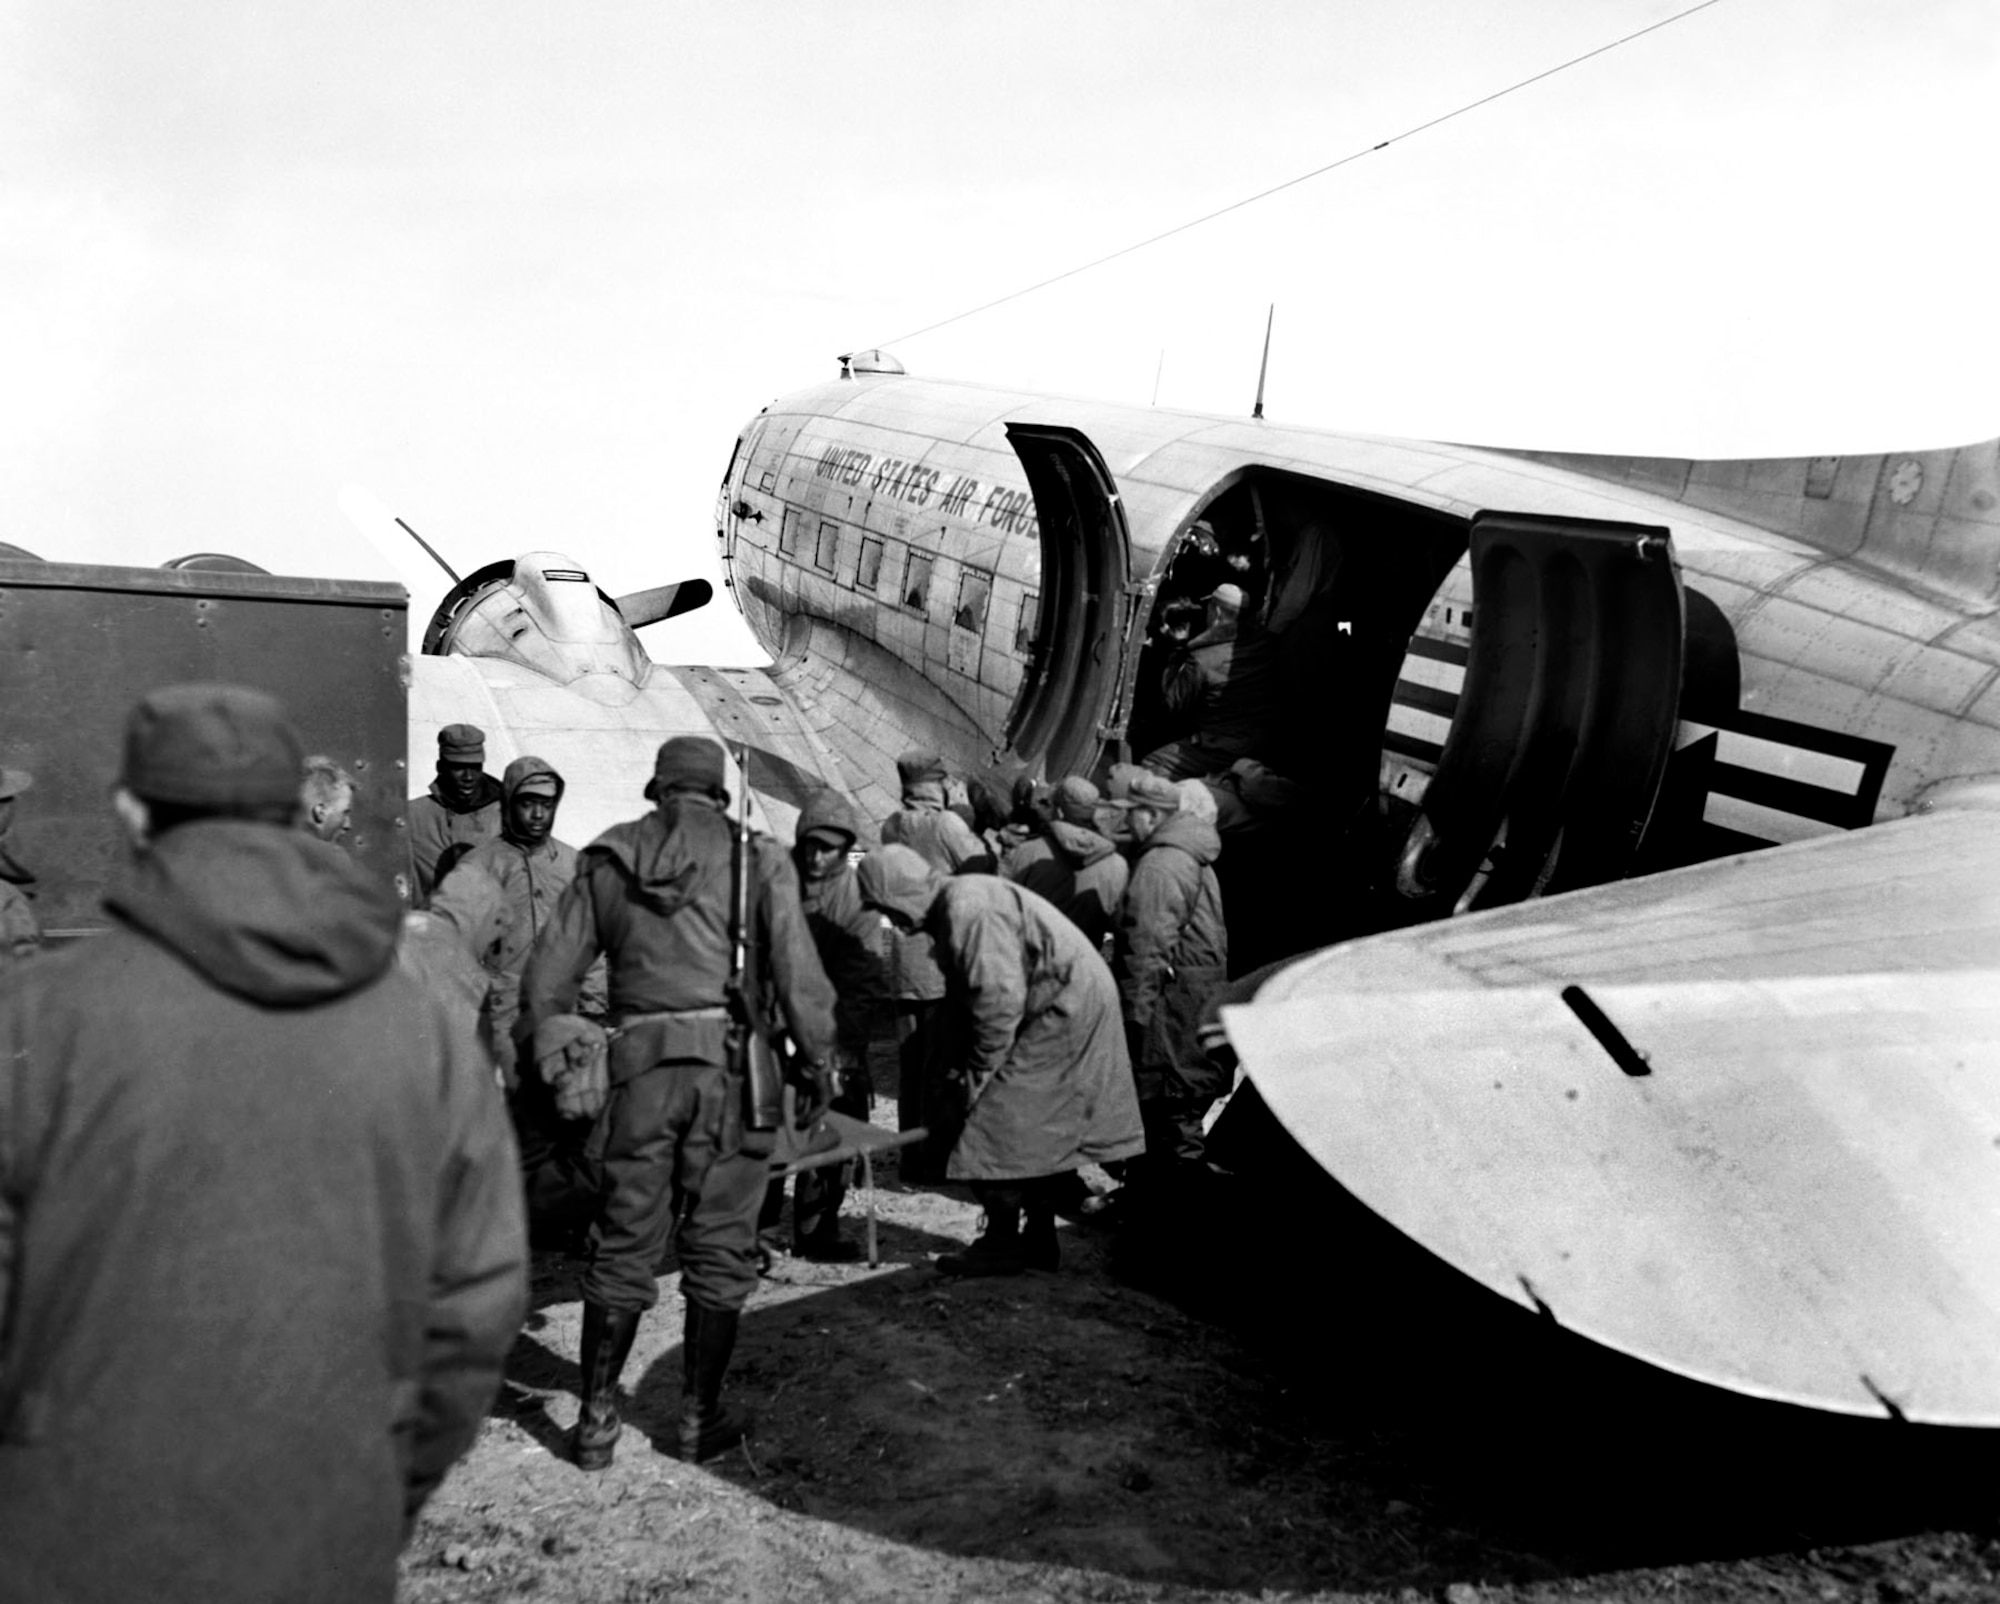 C-47s carried casualties from forward airstrips to air bases further south. These patients are being evacuated from the front near Hagaru-ri in late 1950 during the Chosin retreat. (U.S. Air Force photo)